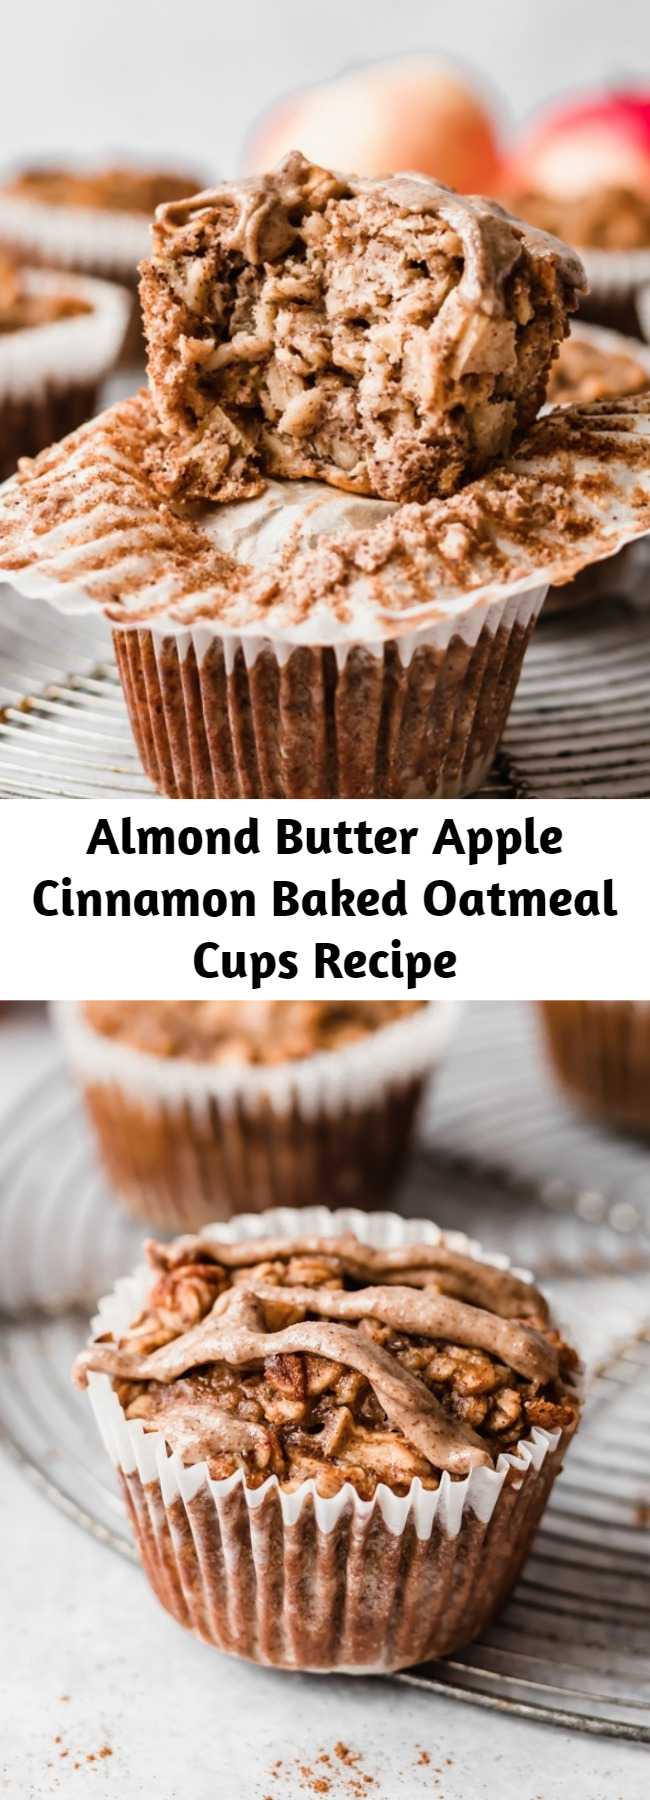 Almond Butter Apple Cinnamon Baked Oatmeal Cups Recipe - Easy apple cinnamon baked oatmeal cups made with applesauce, fresh apples, oats, maple syrup and almond butter for a boost of protein + flavor. Freezer-friendly, great for kids or meal prep! #mealprep #freezerfriendly #oatmeal #oatmealcups #almondbutter #applerecipe #apples #kidfriendly #glutenfree